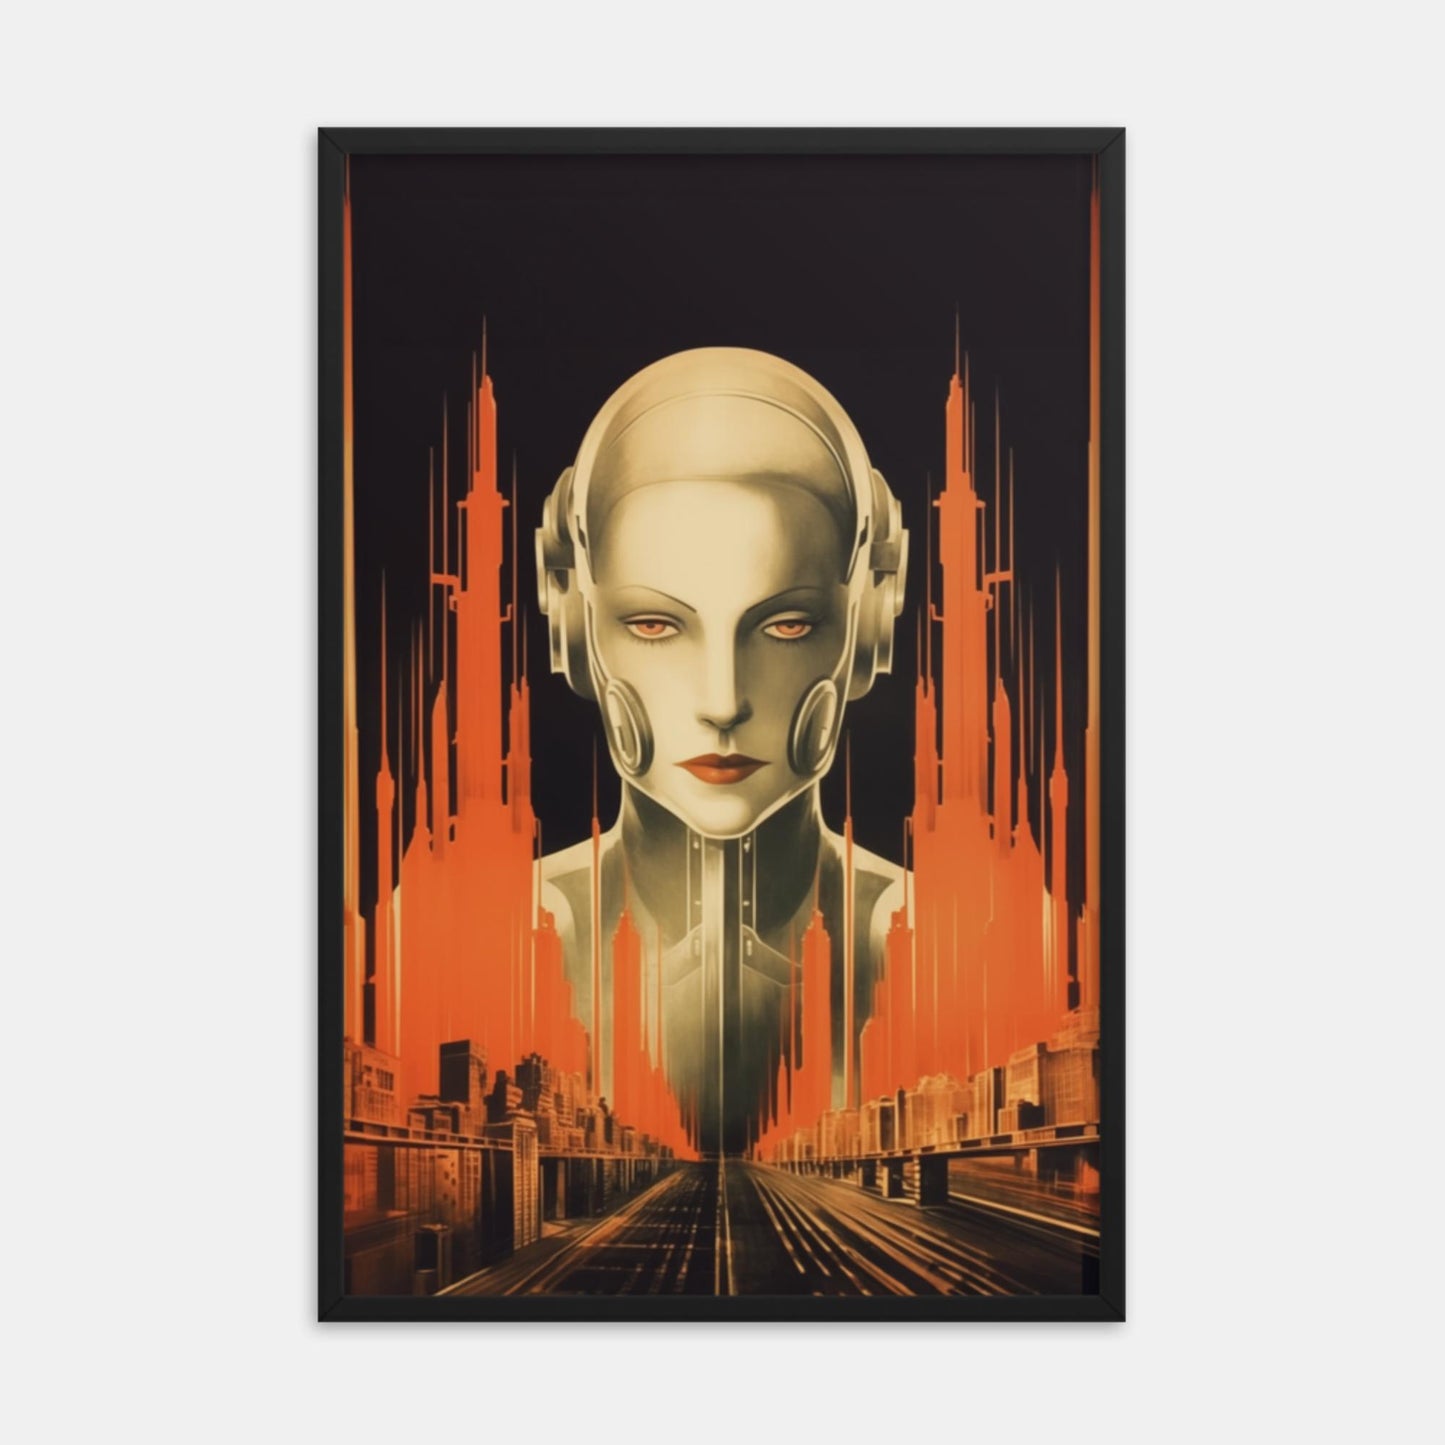 Maria, a robot in human form. Tribute Framed Print